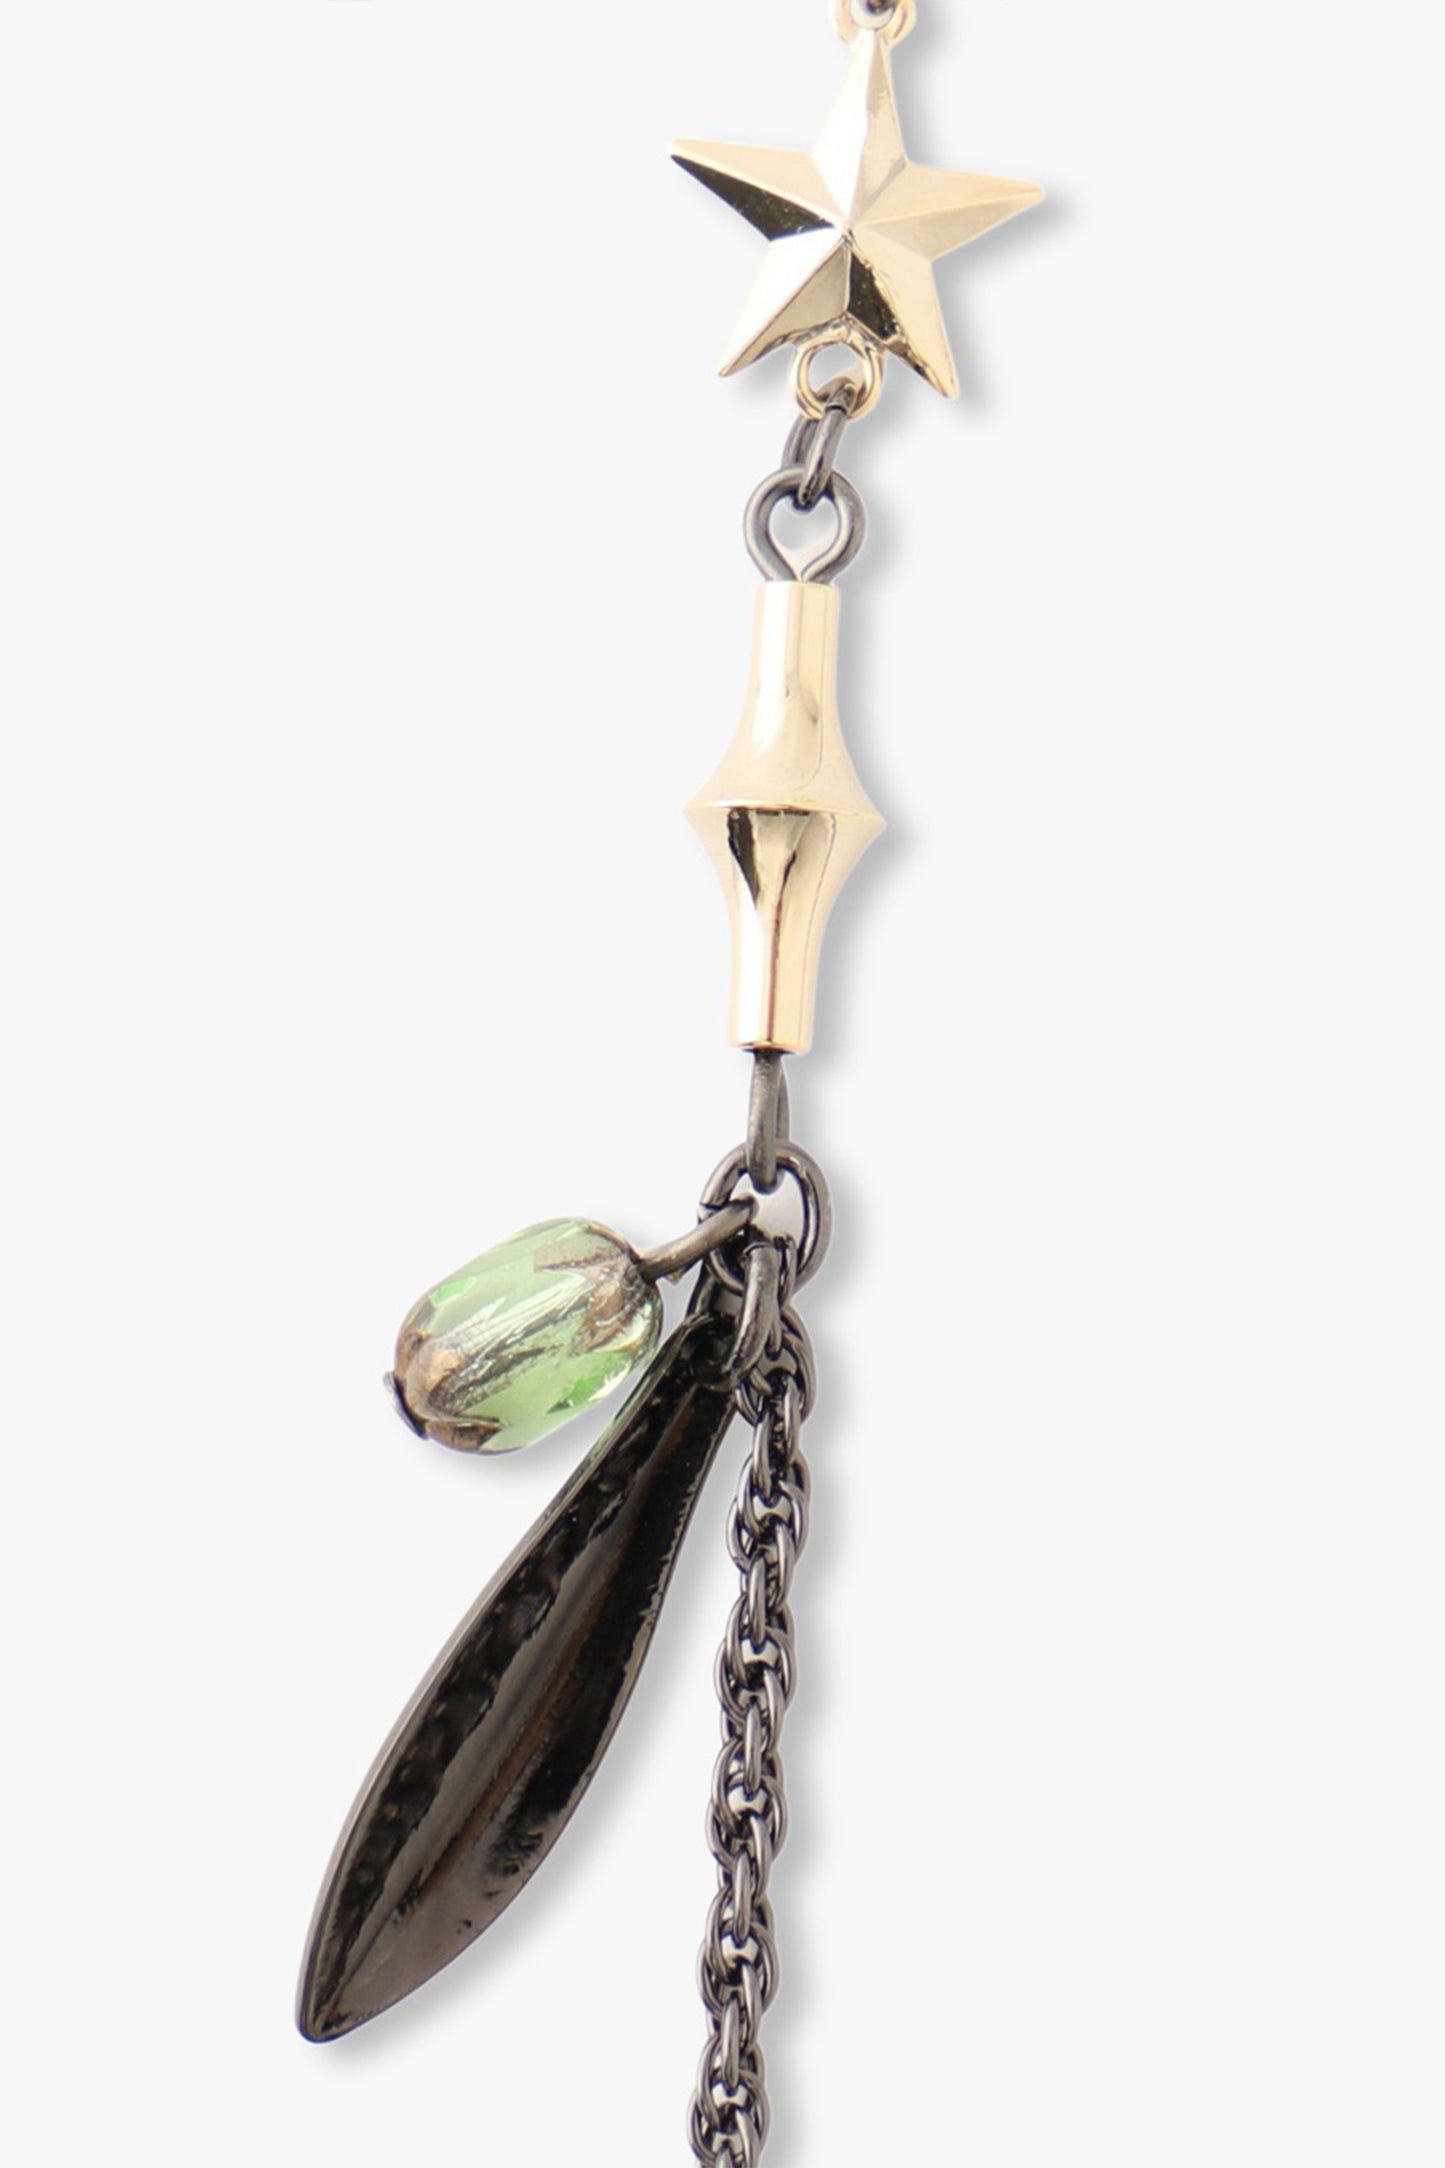 Panda Necklace, on the chain ensemble of golden star, 2-gems green and black under a golden tube